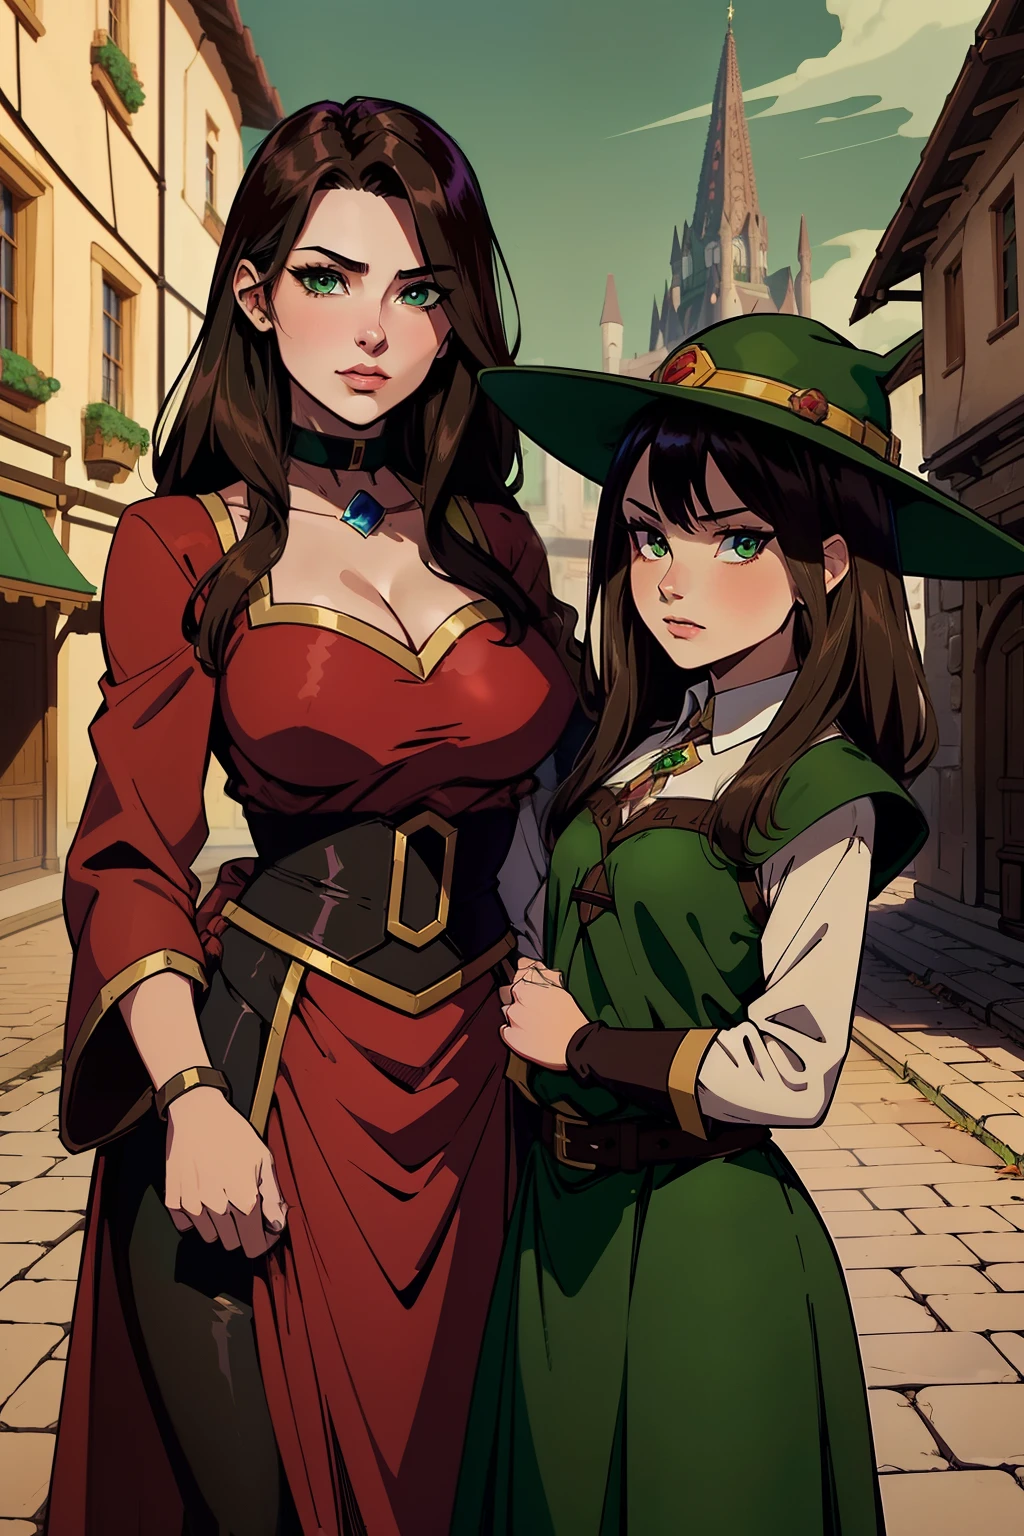 Megumin archimage (Have brunette color hair and dark green eyes) and her daughter 13 years old Esmeralda archmage's apprentice (Have brunette color hair and dark green eyes, wearing sorcerer hats, medieval city, fight against enemy,